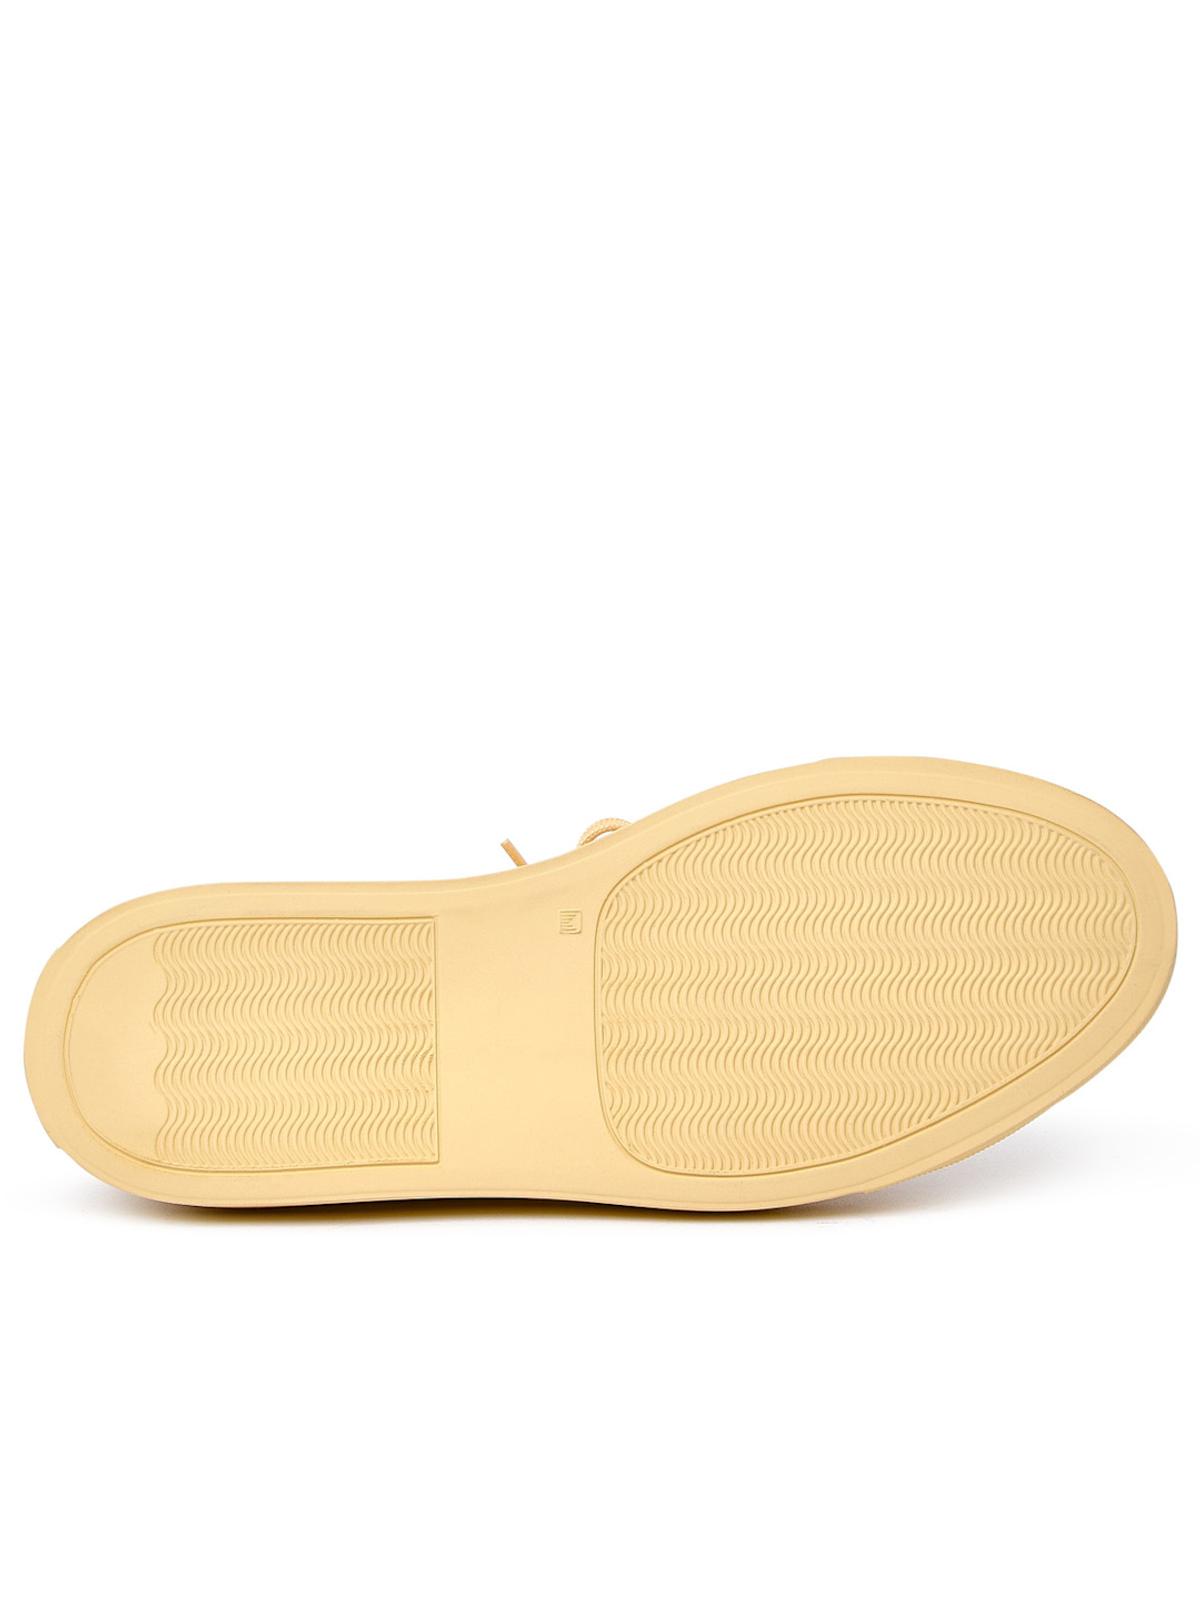 Common Projects Yellow Leather Achilles Sneakers Woman